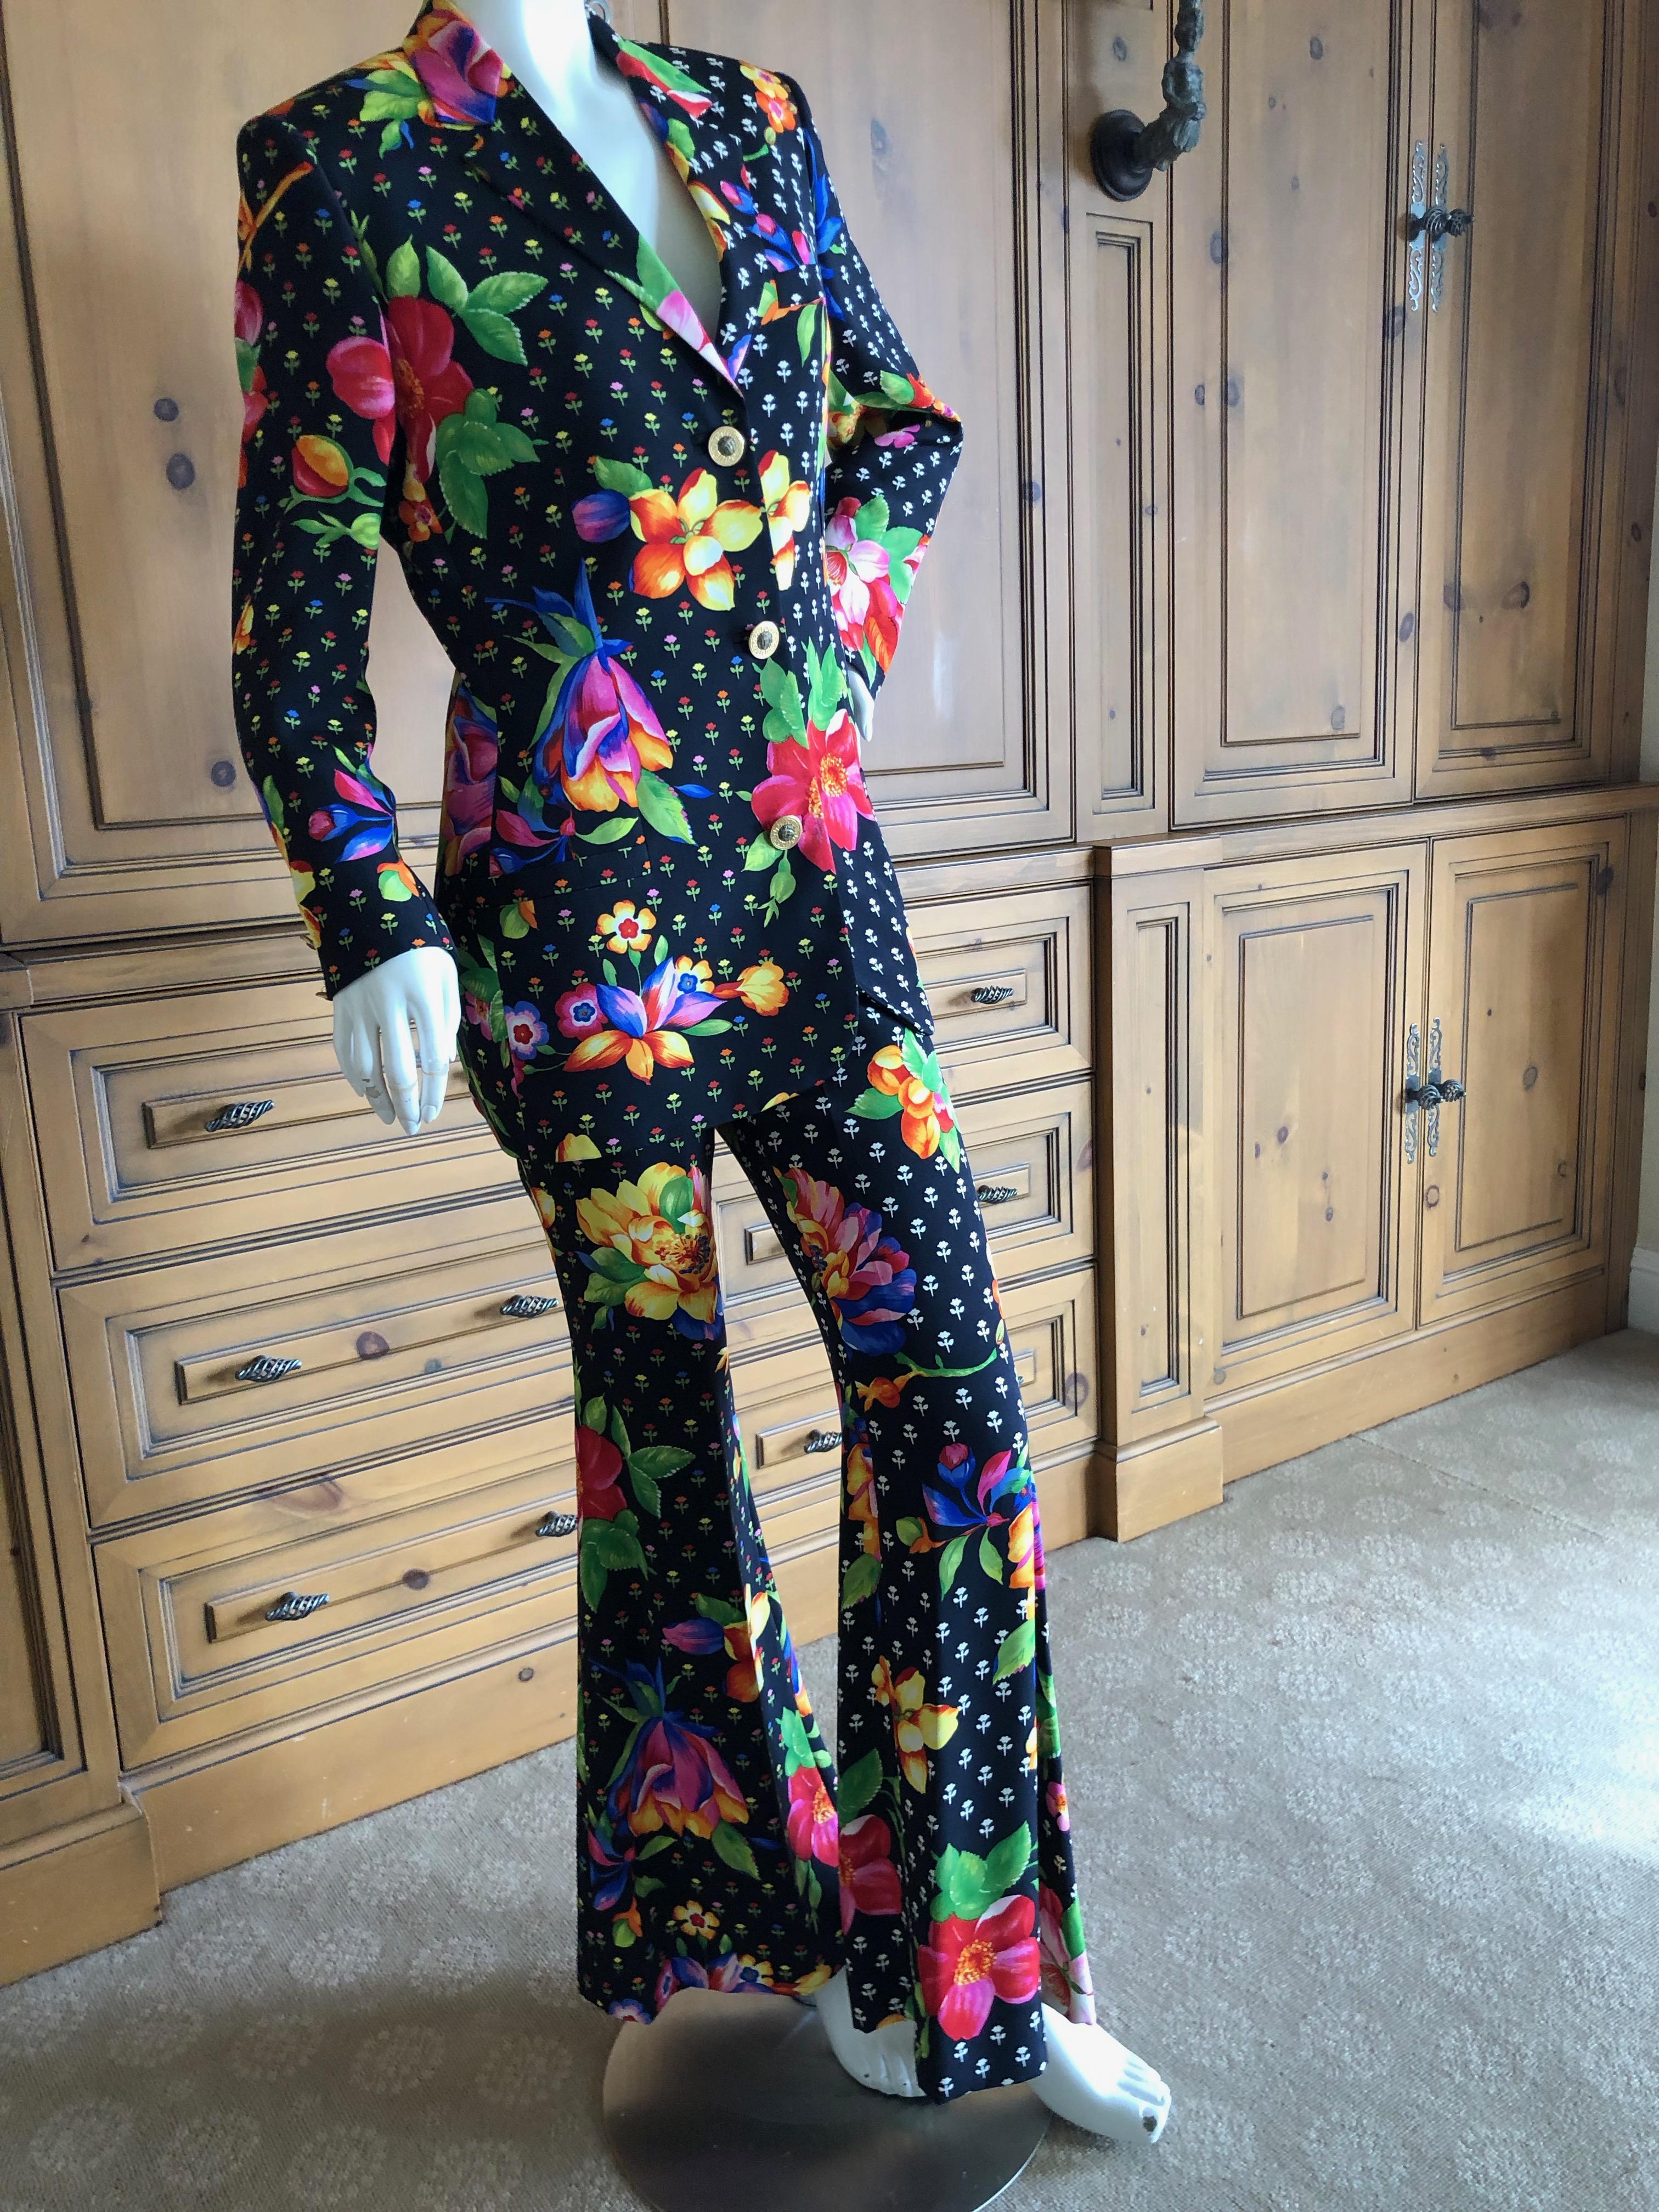 Gianni Versace Couture Fall 1992 Silk Floral Bell Bottom Pant Suit In Excellent Condition For Sale In Cloverdale, CA